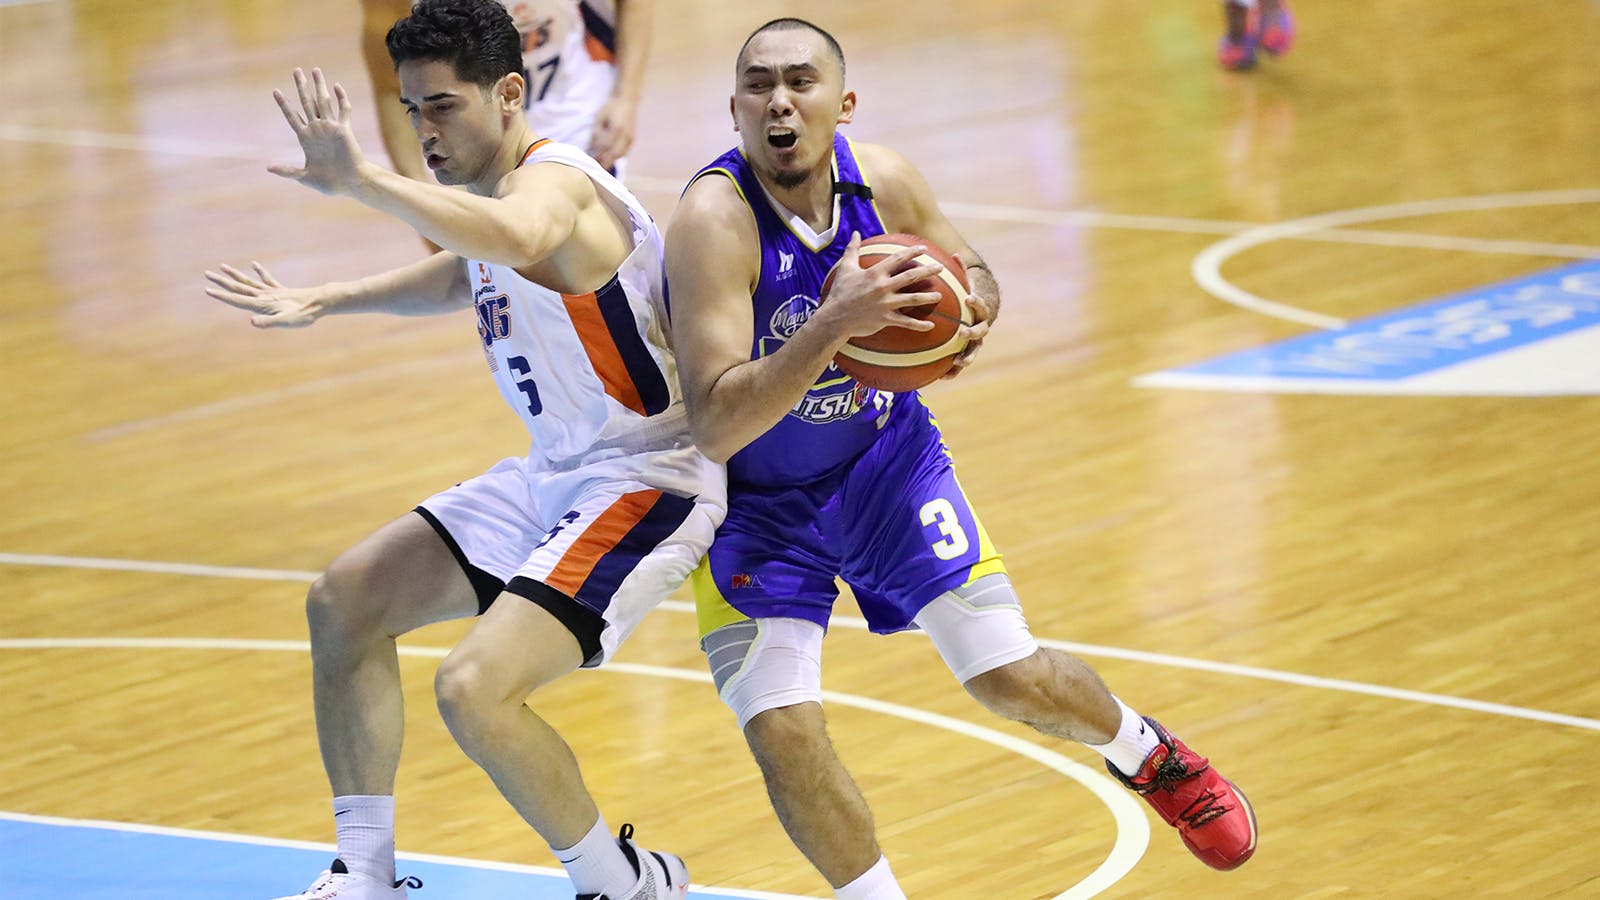 4 major questions as Meralco looks to book semis seat vs Magnolia